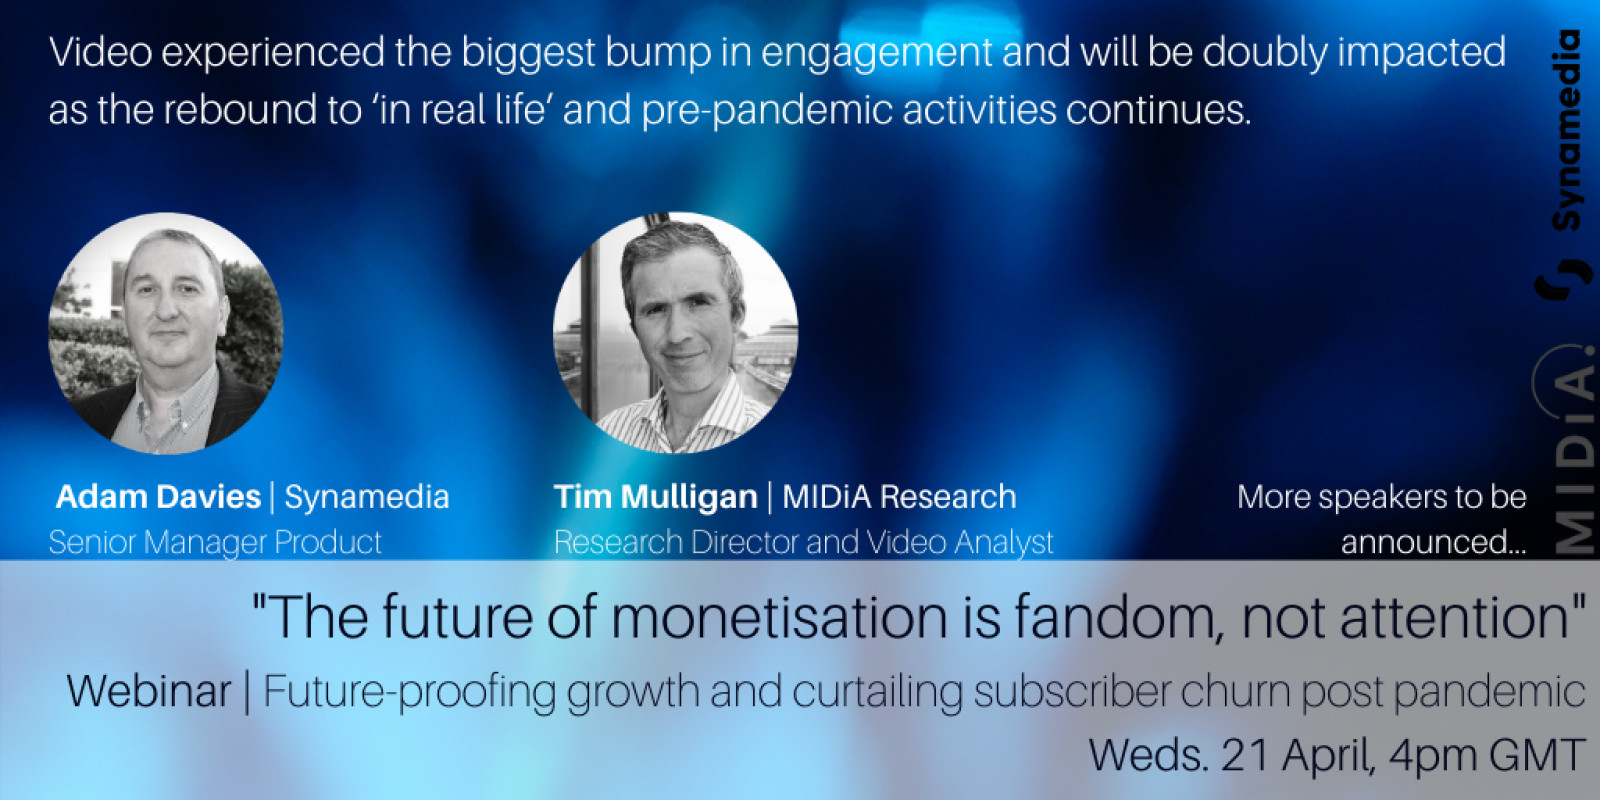 Cover image for Webinar April 21-22: the future is monetising fandom, not attention